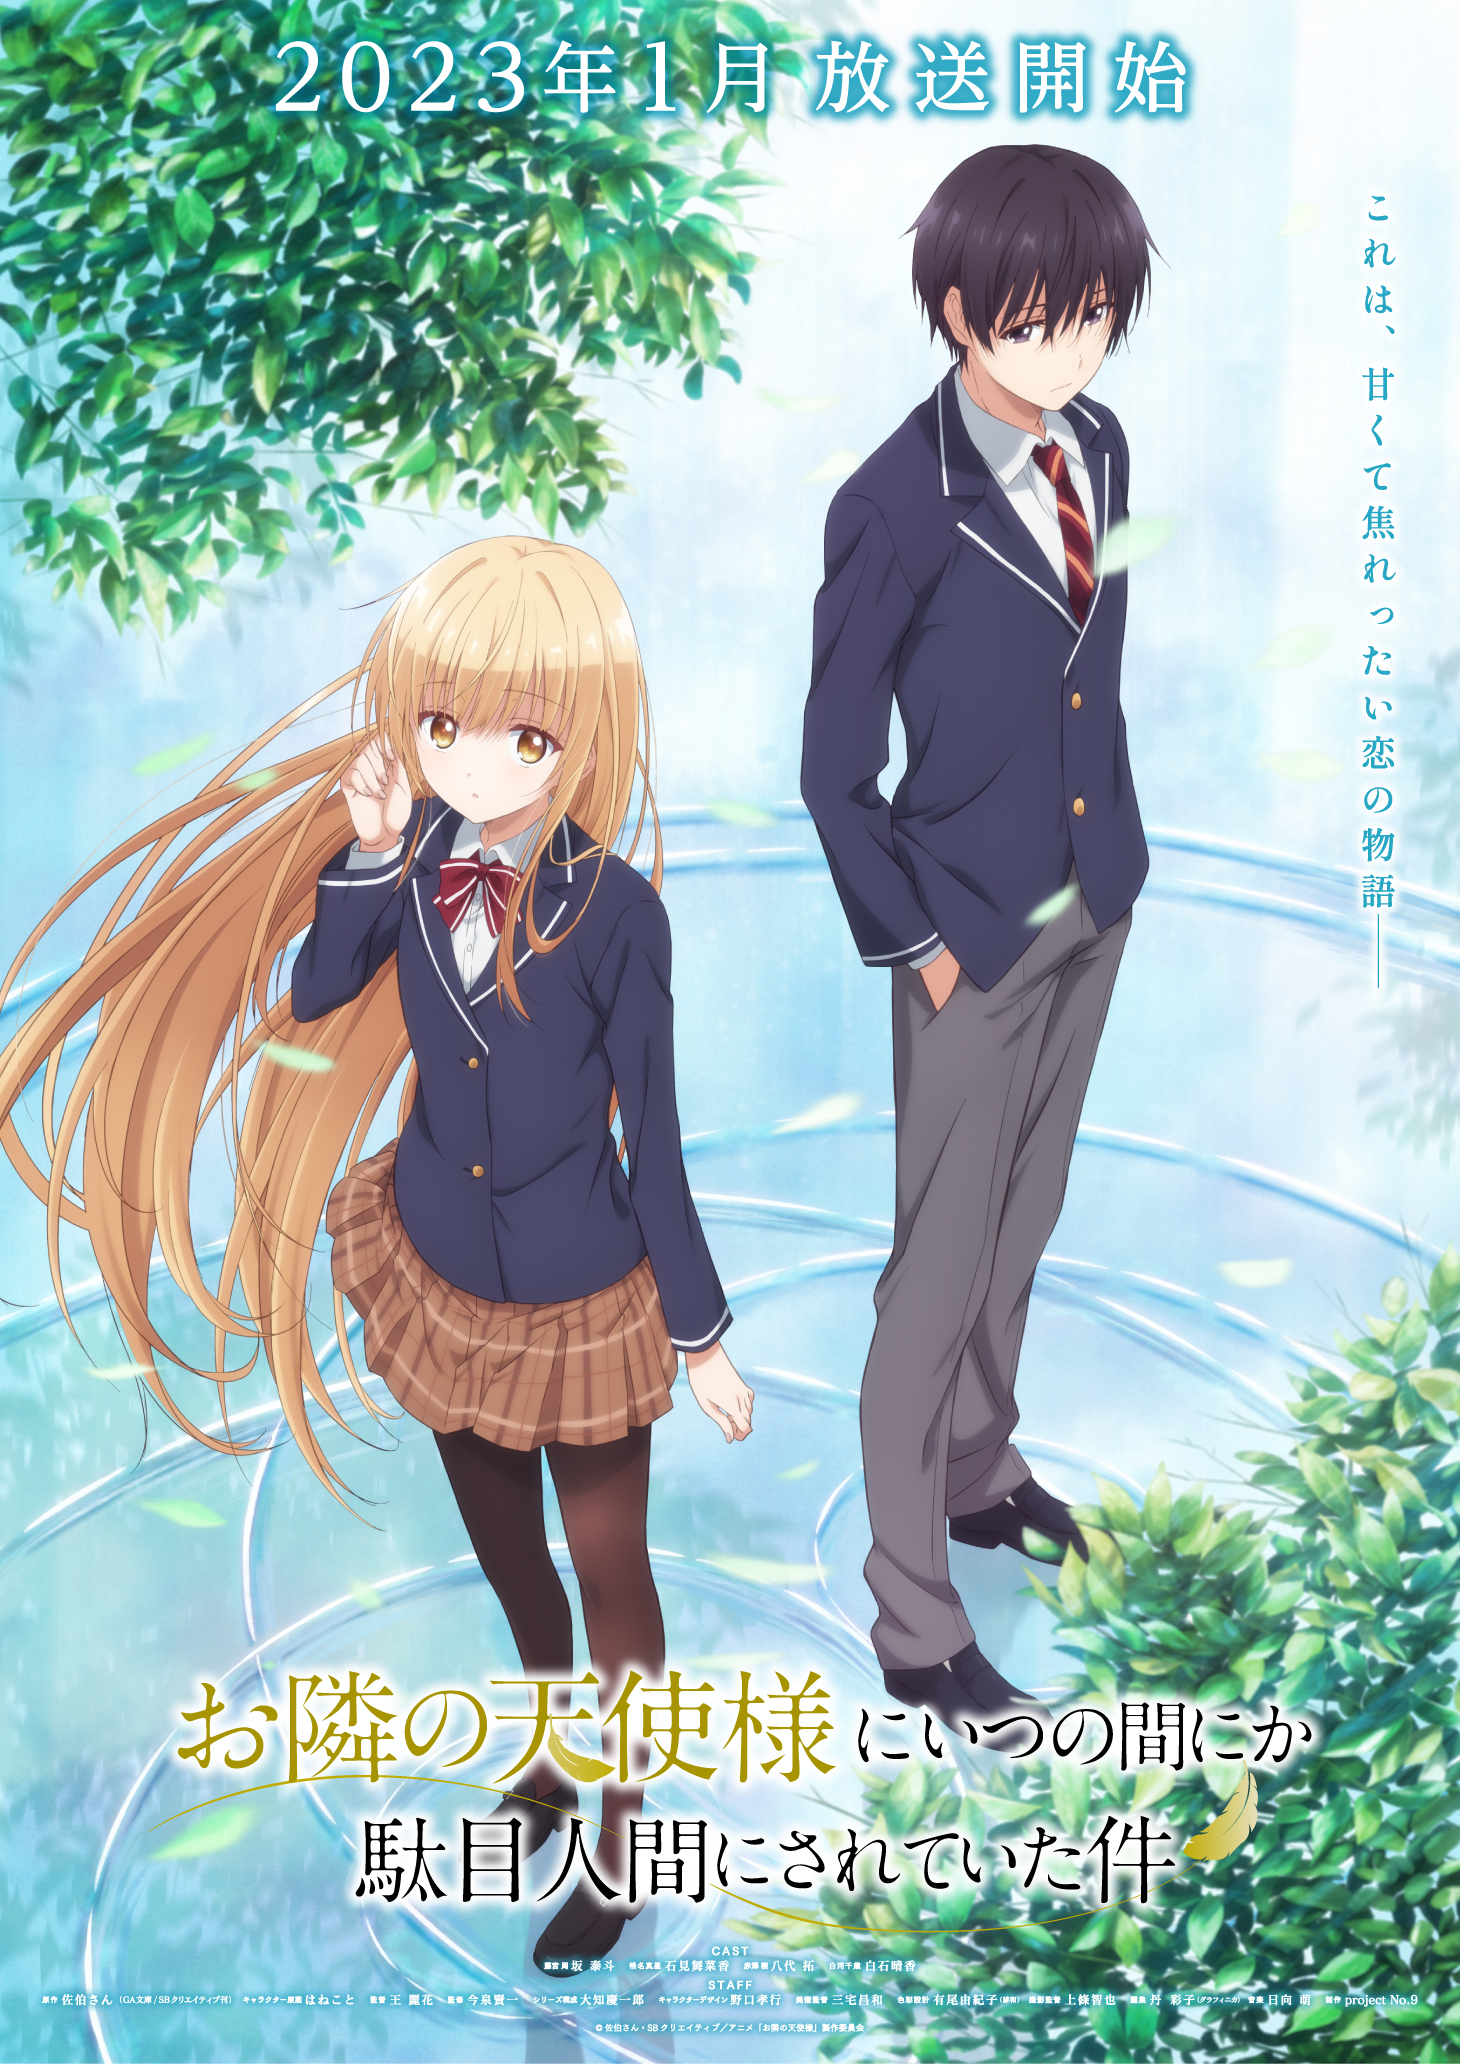 The Angel Next Door Spoils Me Rotten Anime Trailer and Key Visual Revealed